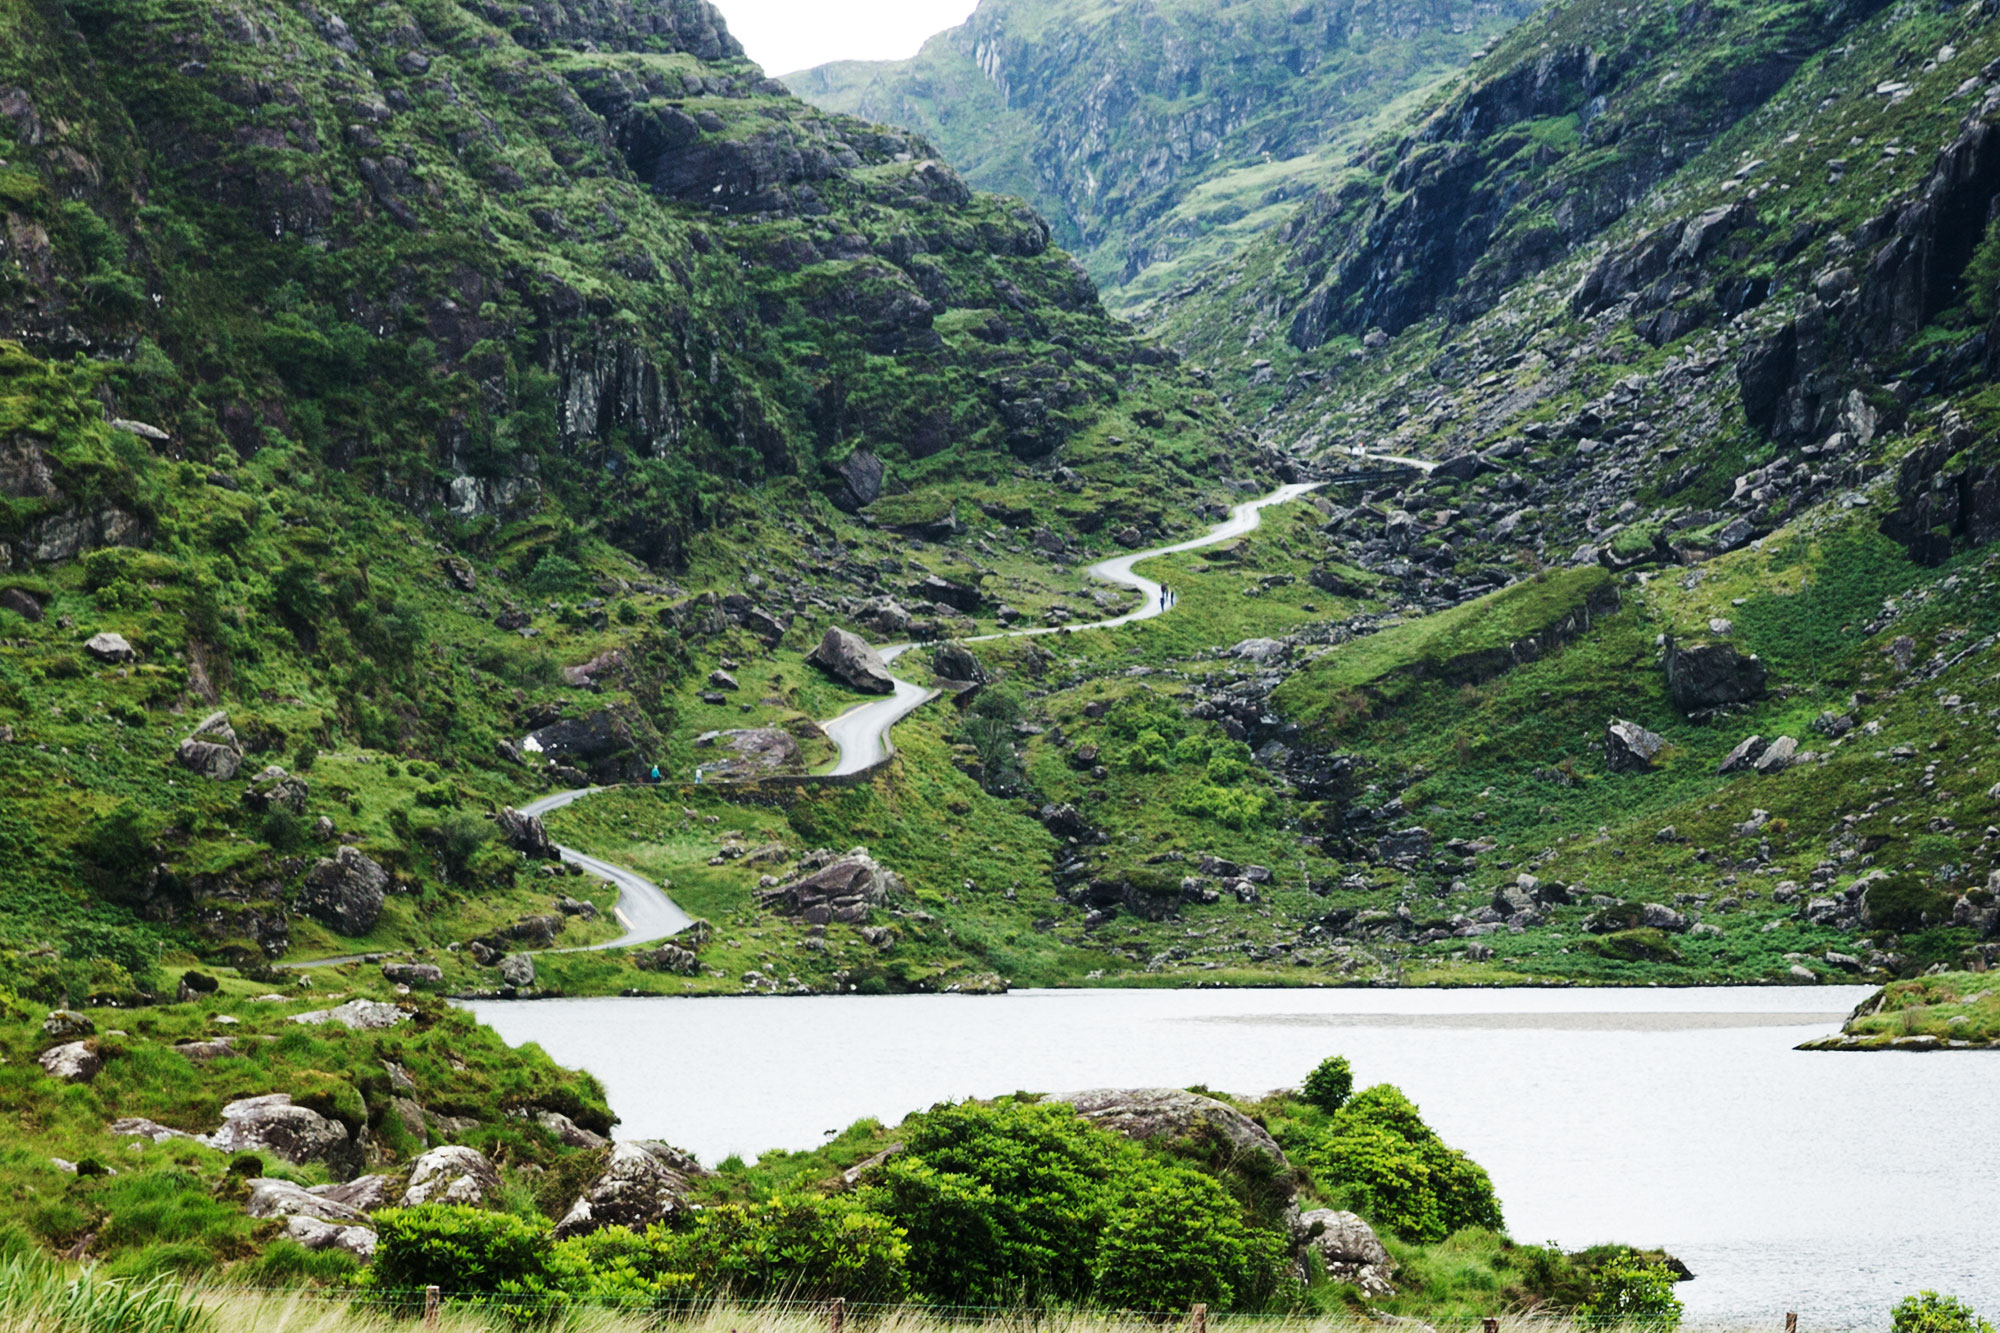 Green rugged mountain pass with windy road and lake at the Gap of Dunloe in County Kerry, Ireland.